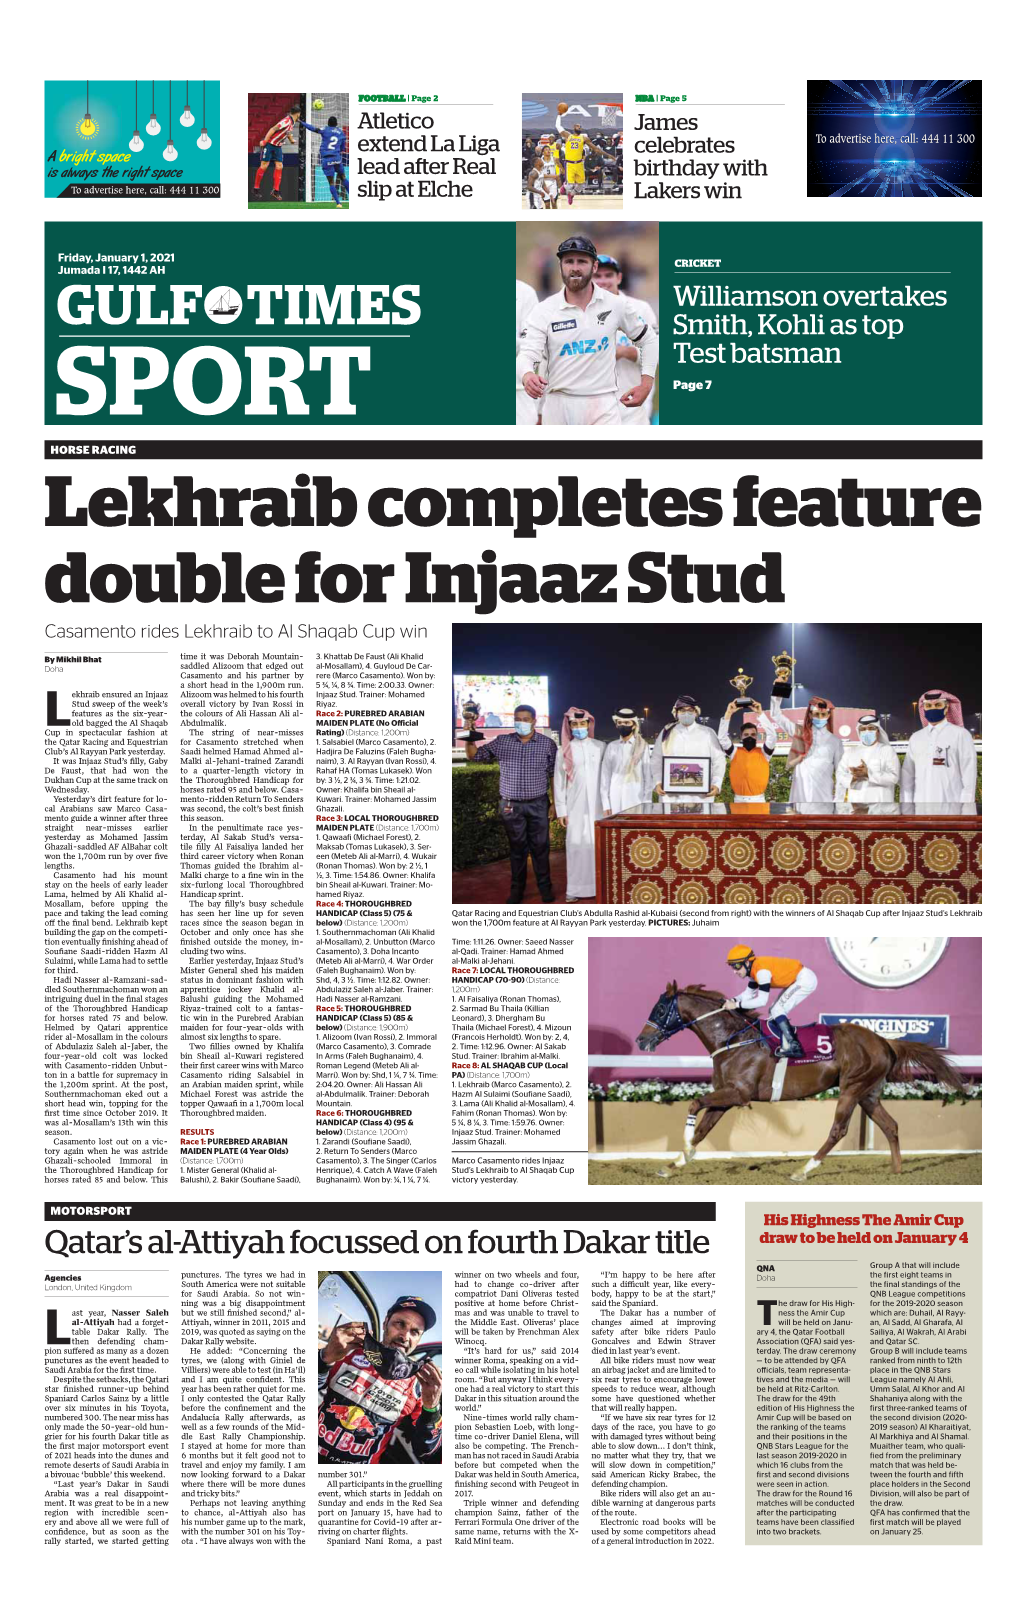 SPORT Page 7 HORSE RACING Lekhraib Completes Feature Double for Injaaz Stud Casamento Rides Lekhraib to Al Shaqab Cup Win